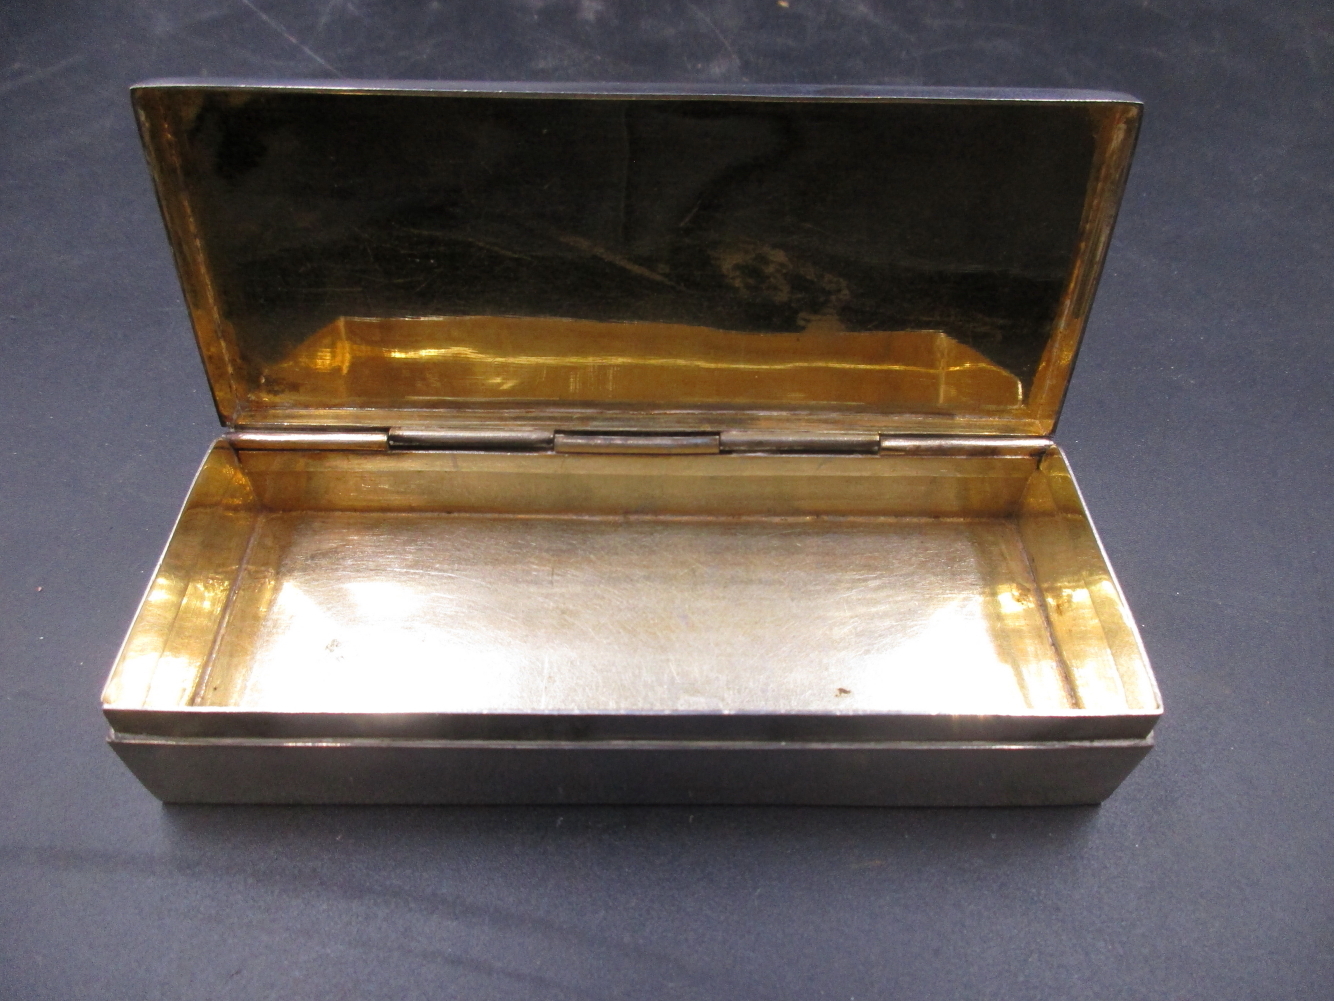 A CHINESE SILVER BOX WITH ENAMEL INSERT SHANGHAI ROWING CLUB 1888-1938.THE ROWING CLUB WAS FOUNDED - Image 3 of 3